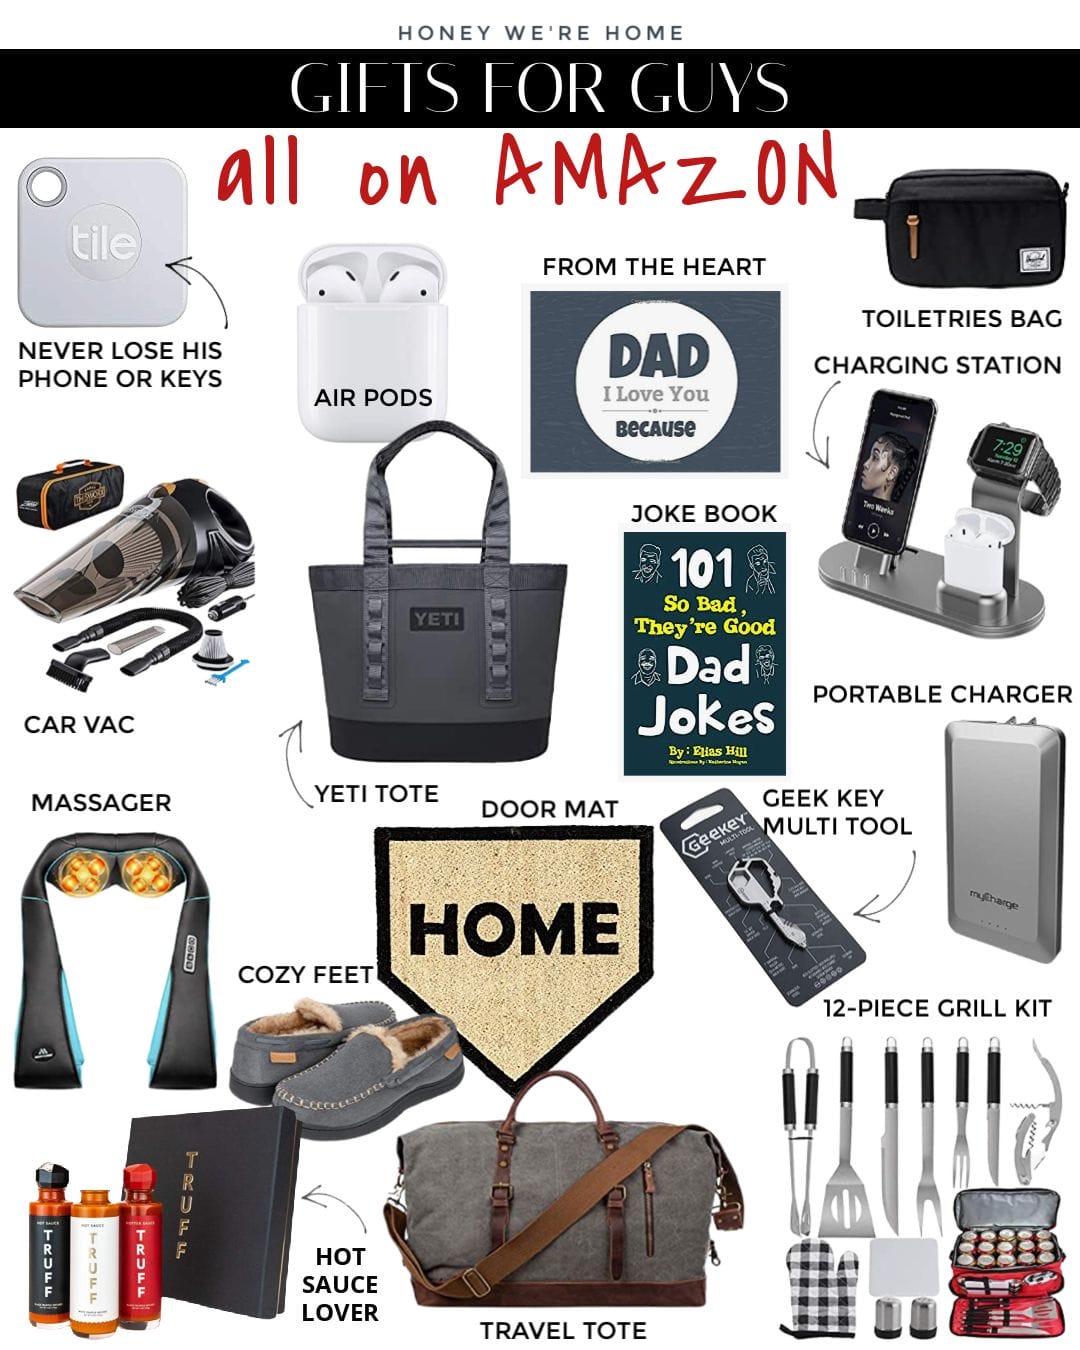 Gifts for Men | All on Amazon